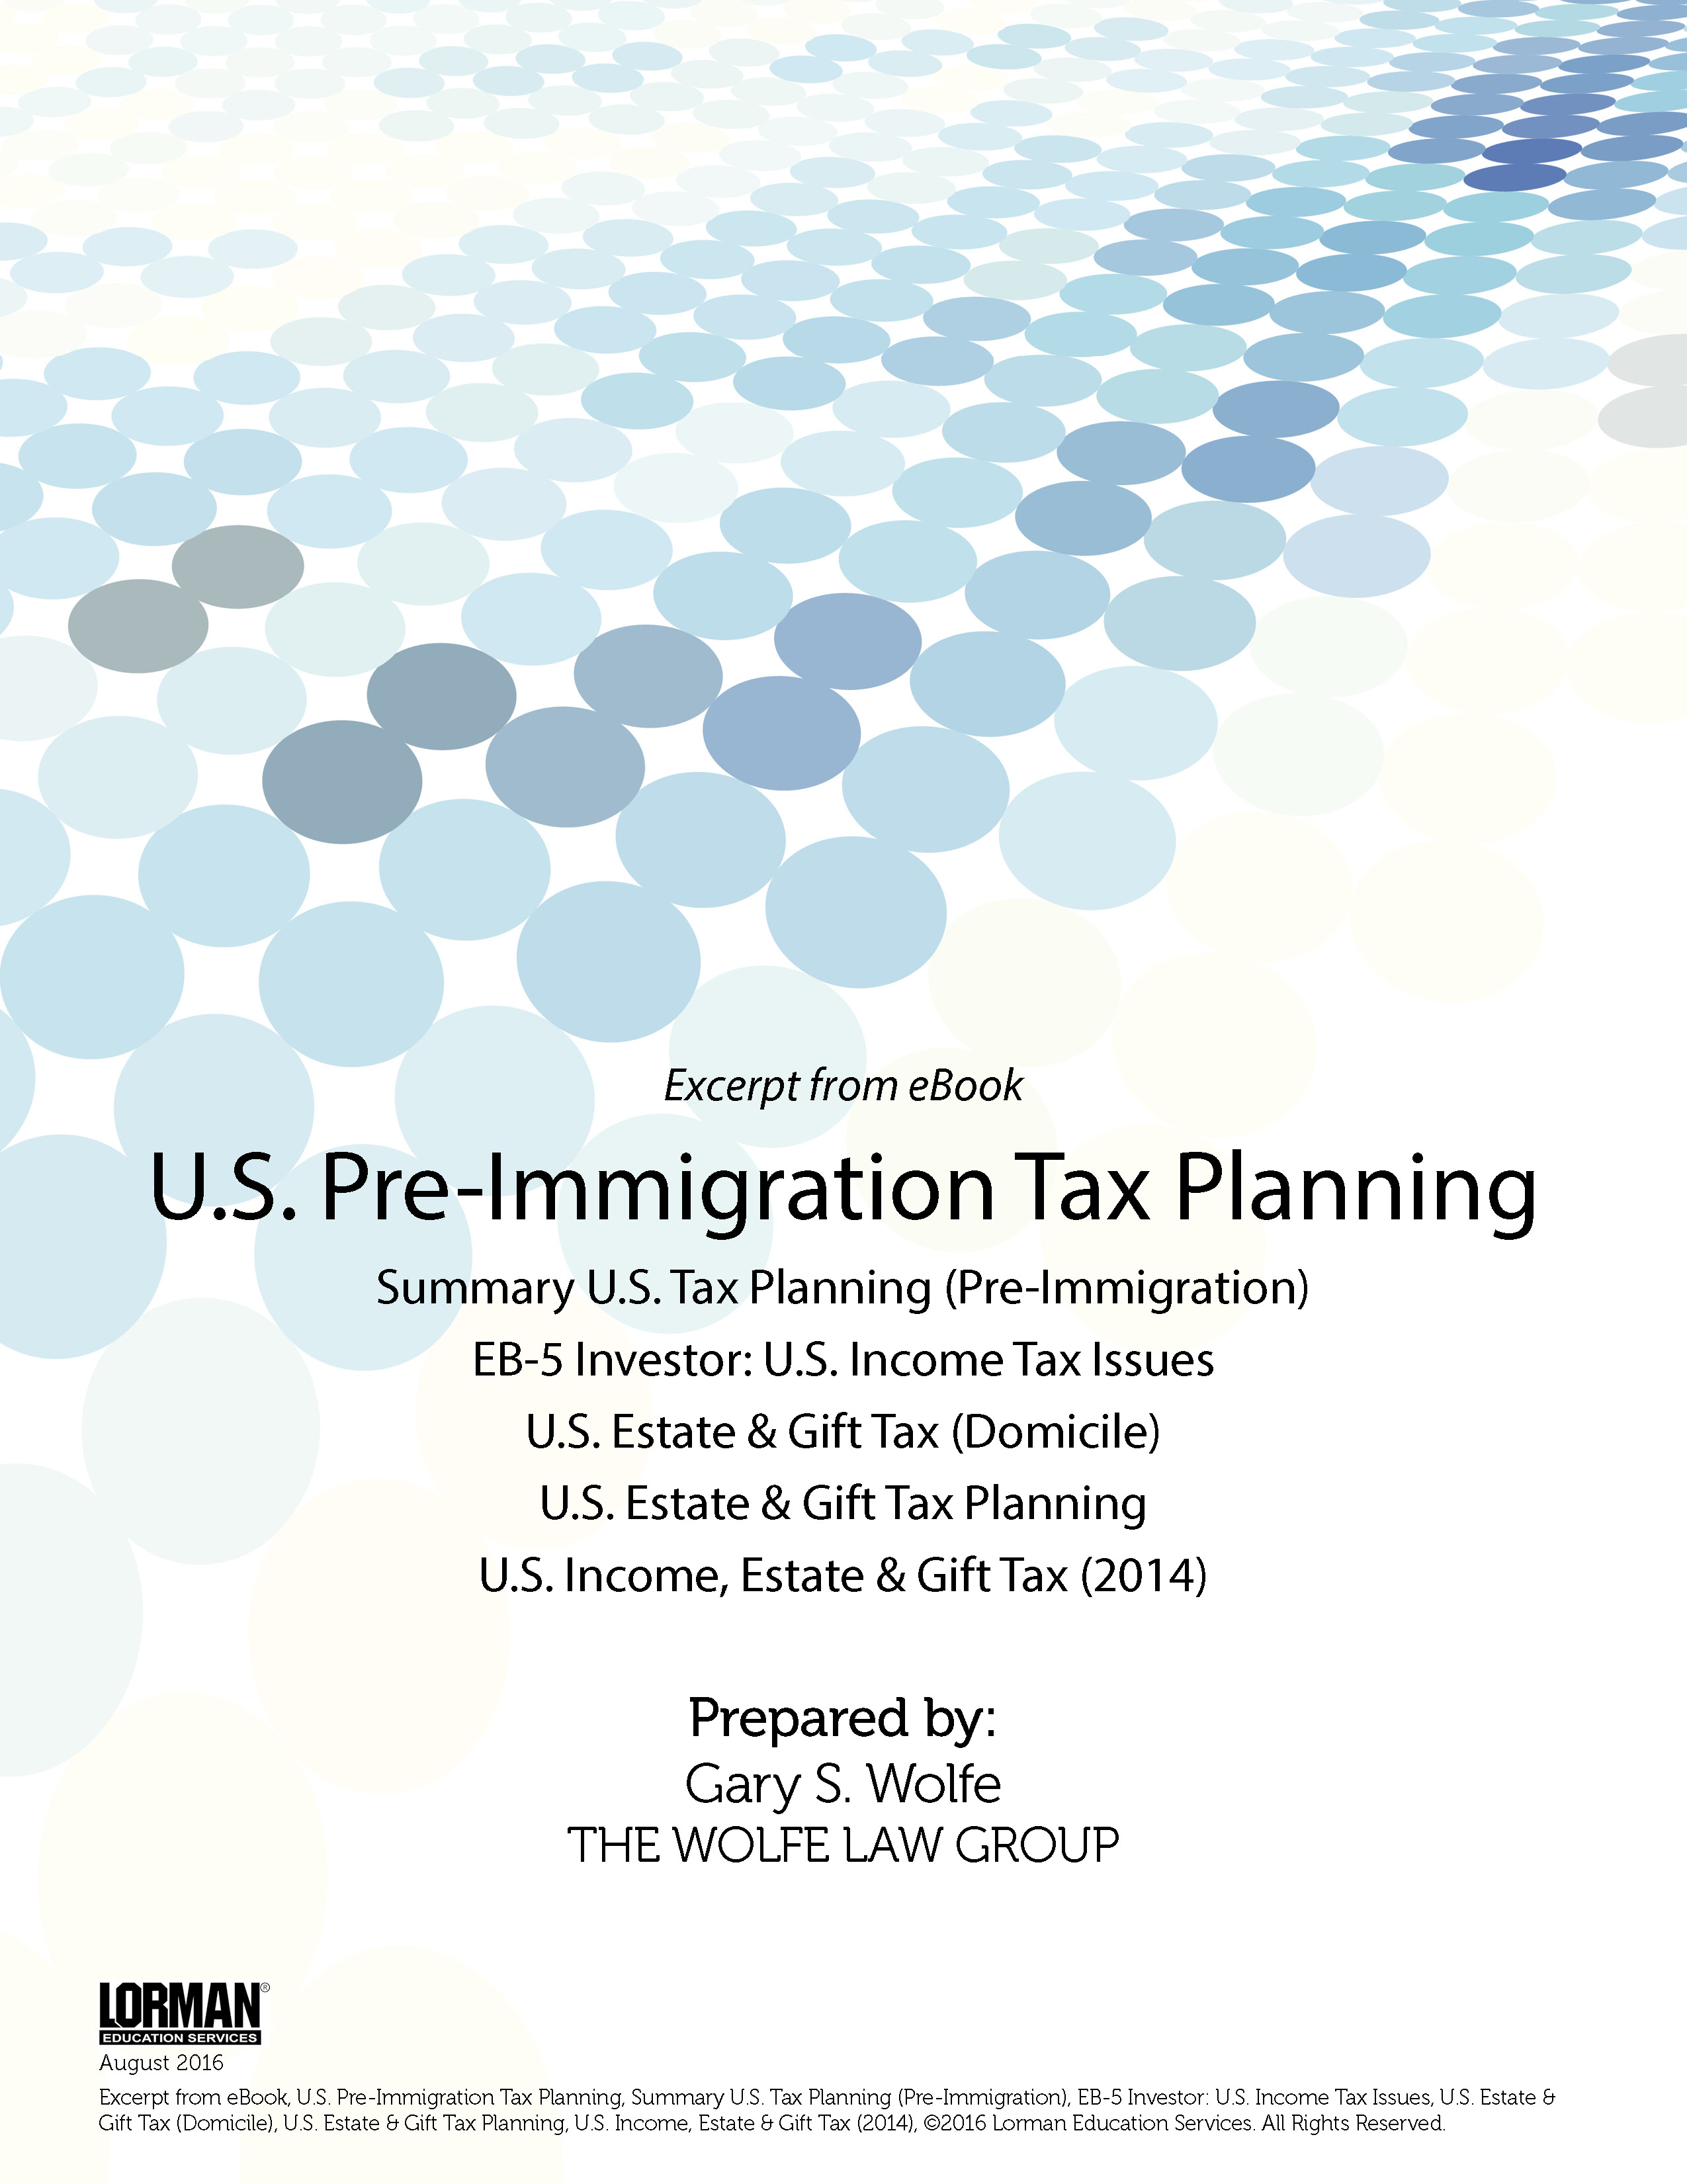 Pre-Immigration Tax Planning: U.S. Income, Estate and Gift Tax; EB-5 Investor